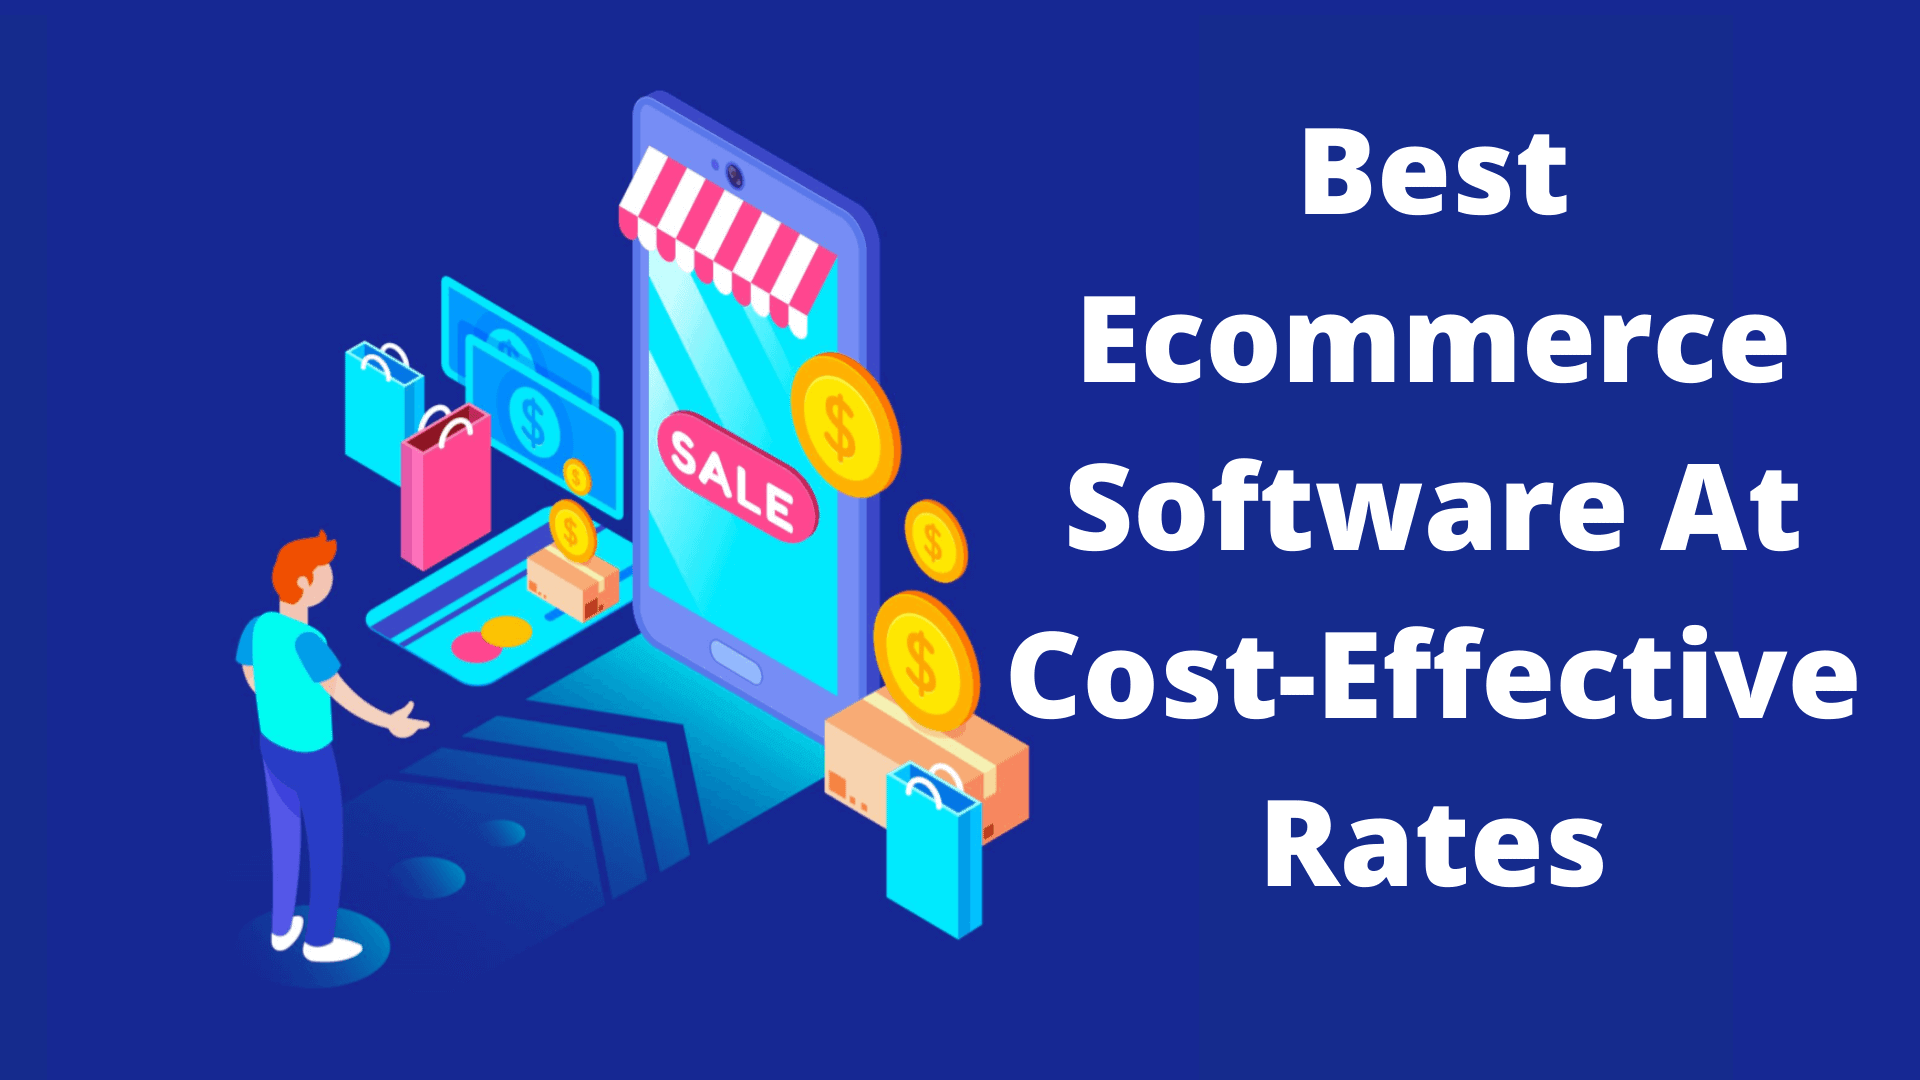 Best Ecommerce Software At Cost-Effective Rates (2) (1)